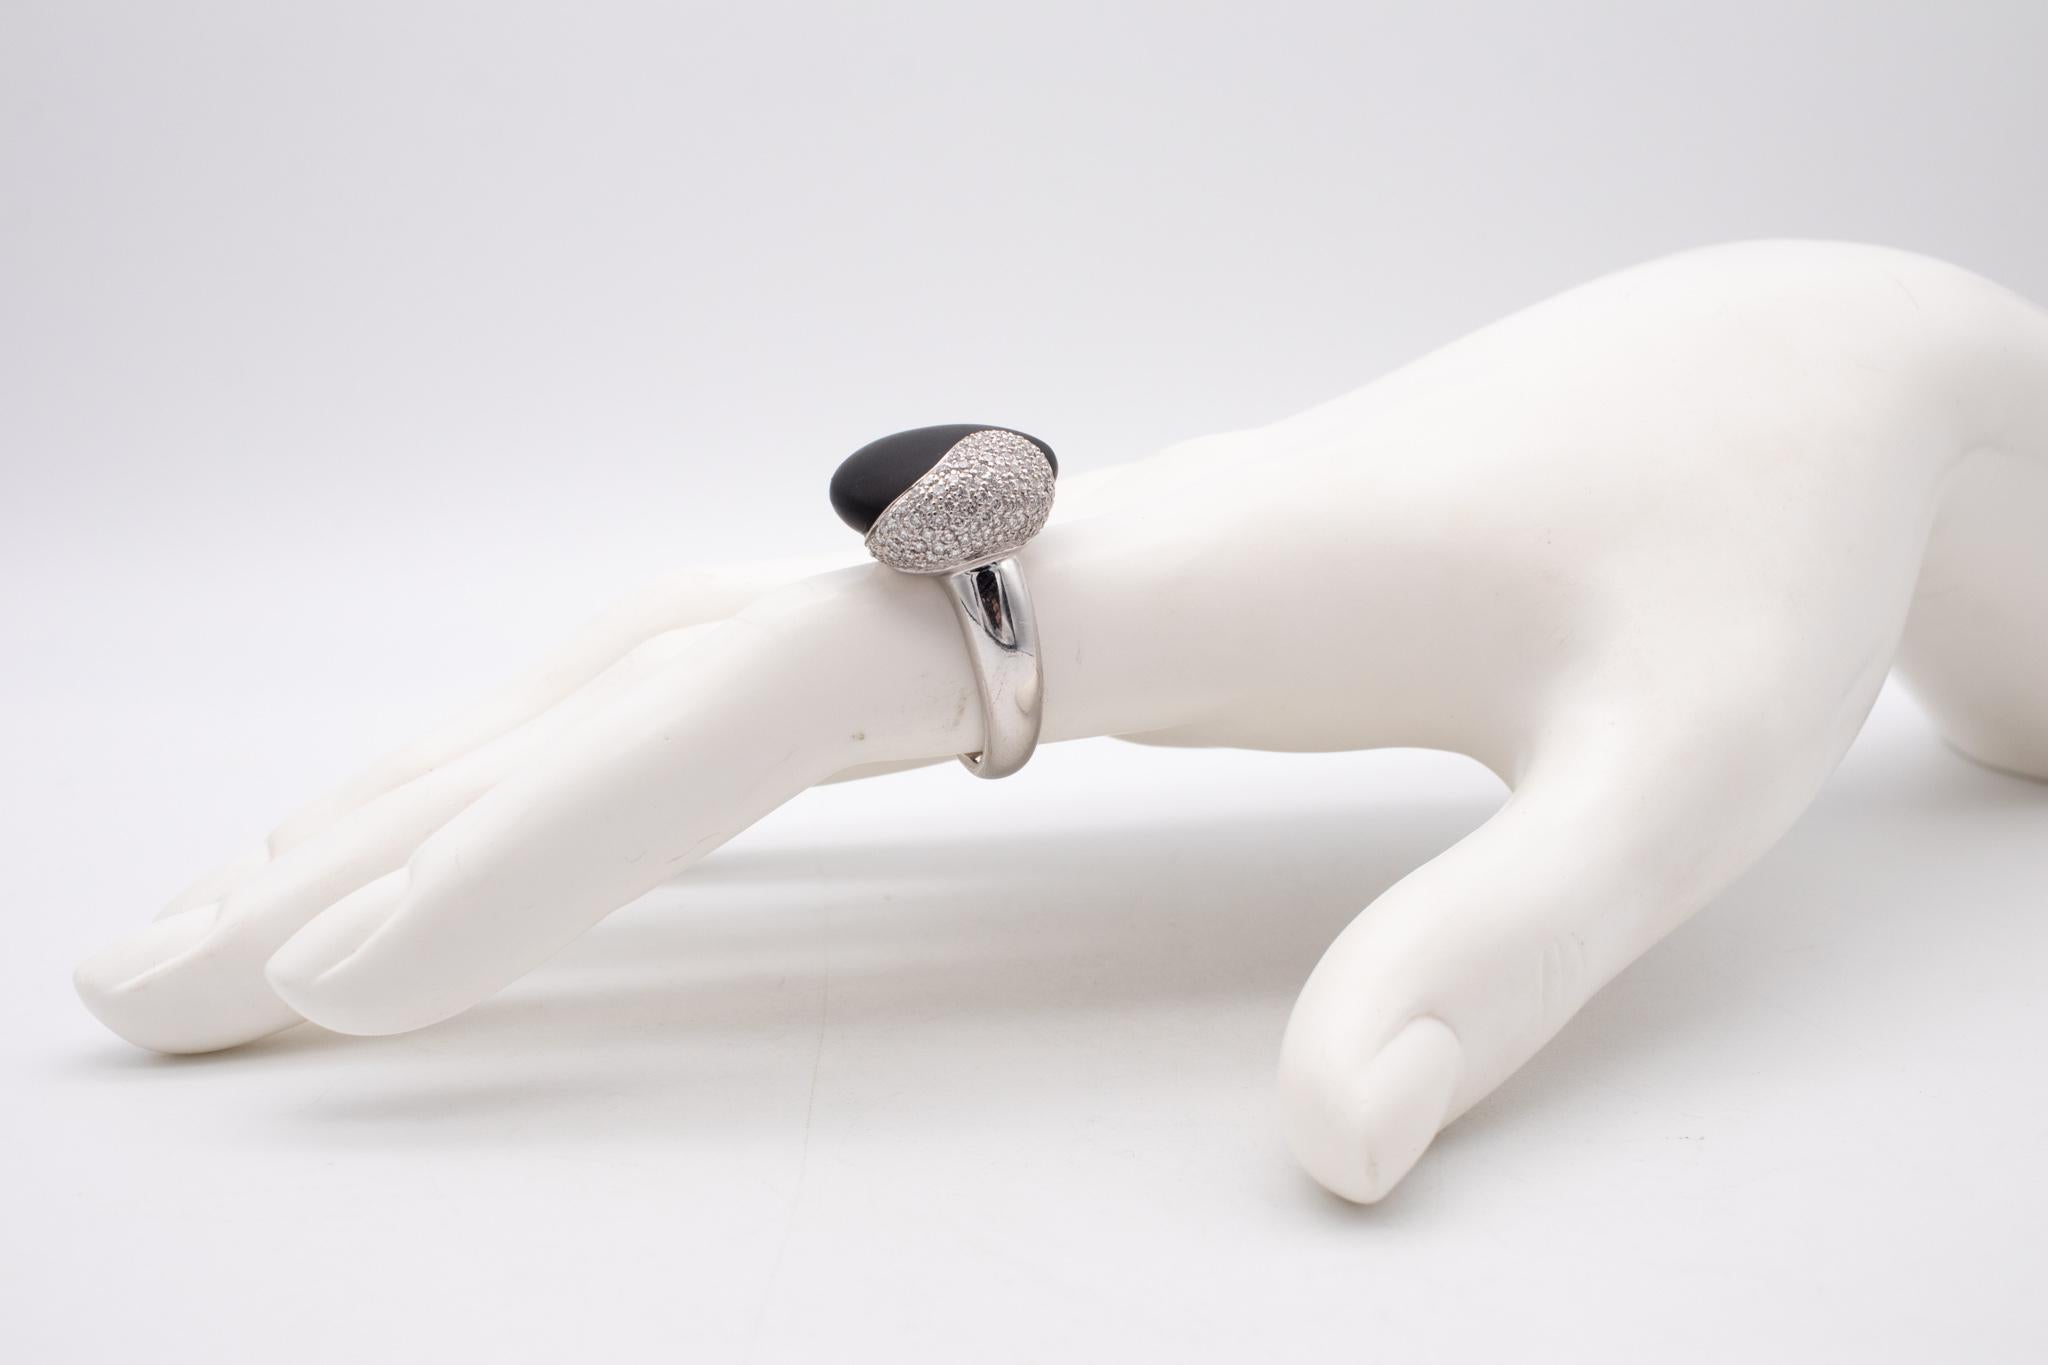 Contemporary Meister of Zurich 18kt White Gold Ring with VS Diamonds and Frosted Black Onyx